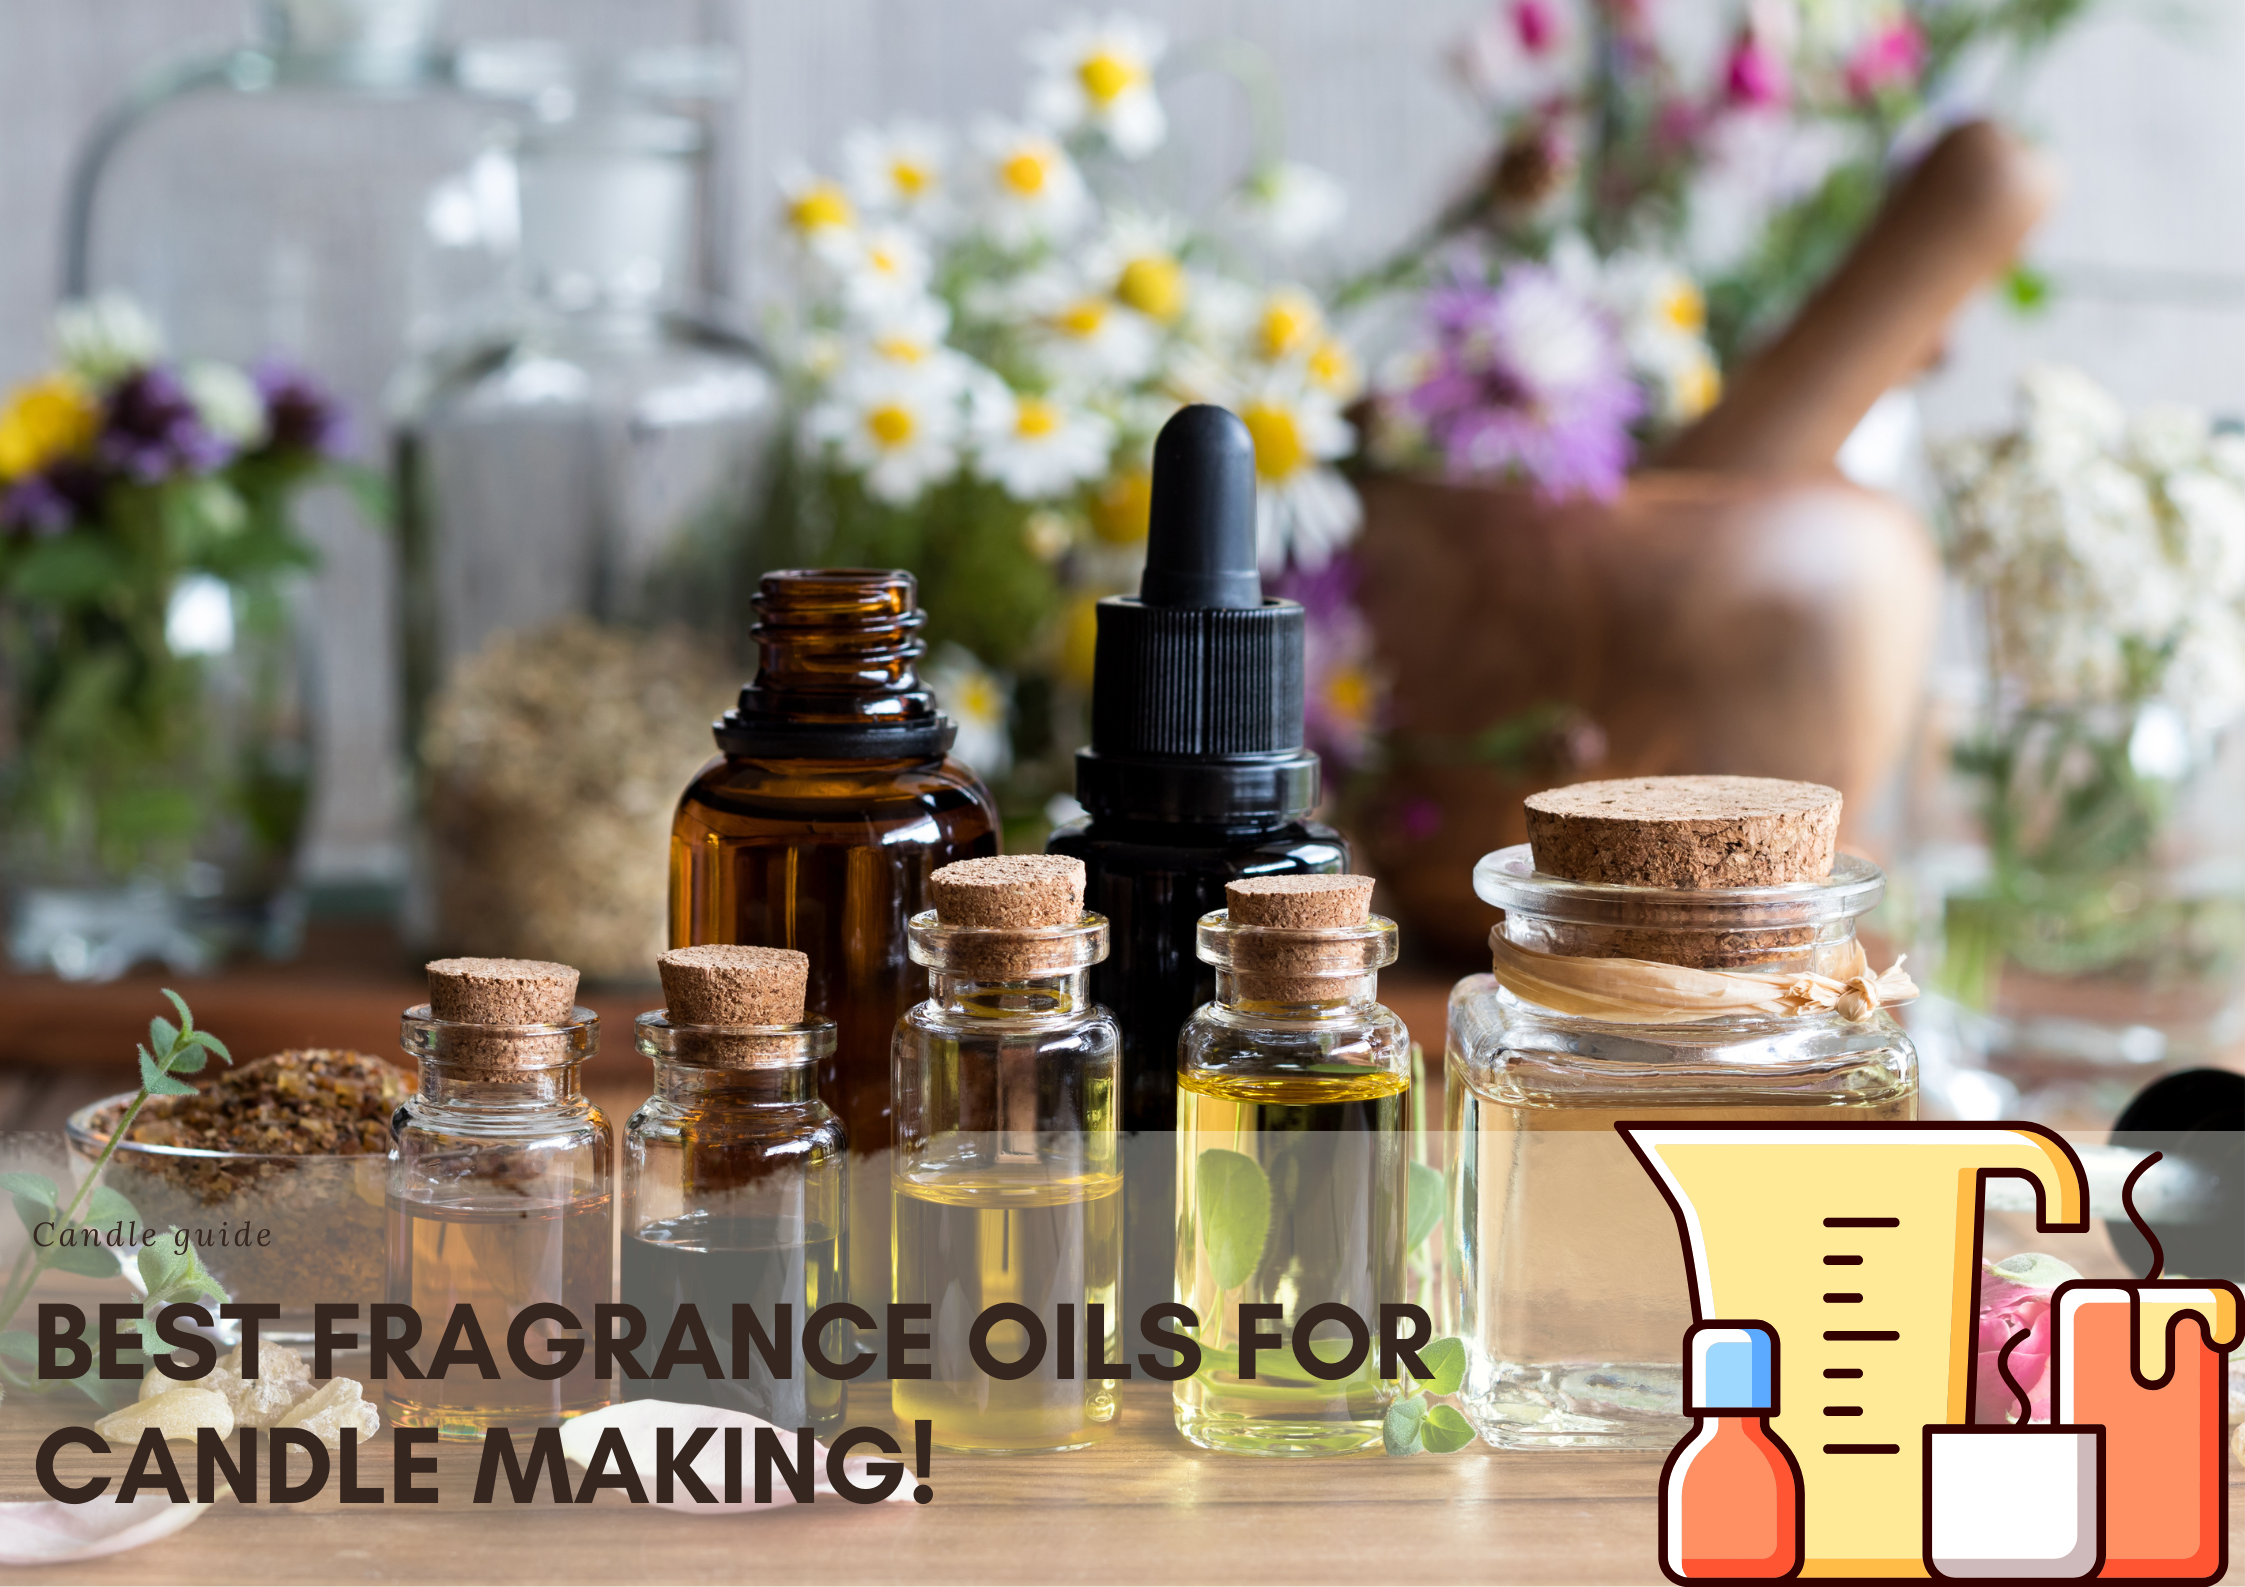 Affordable Candle Making Supplies, Fragrance Oils